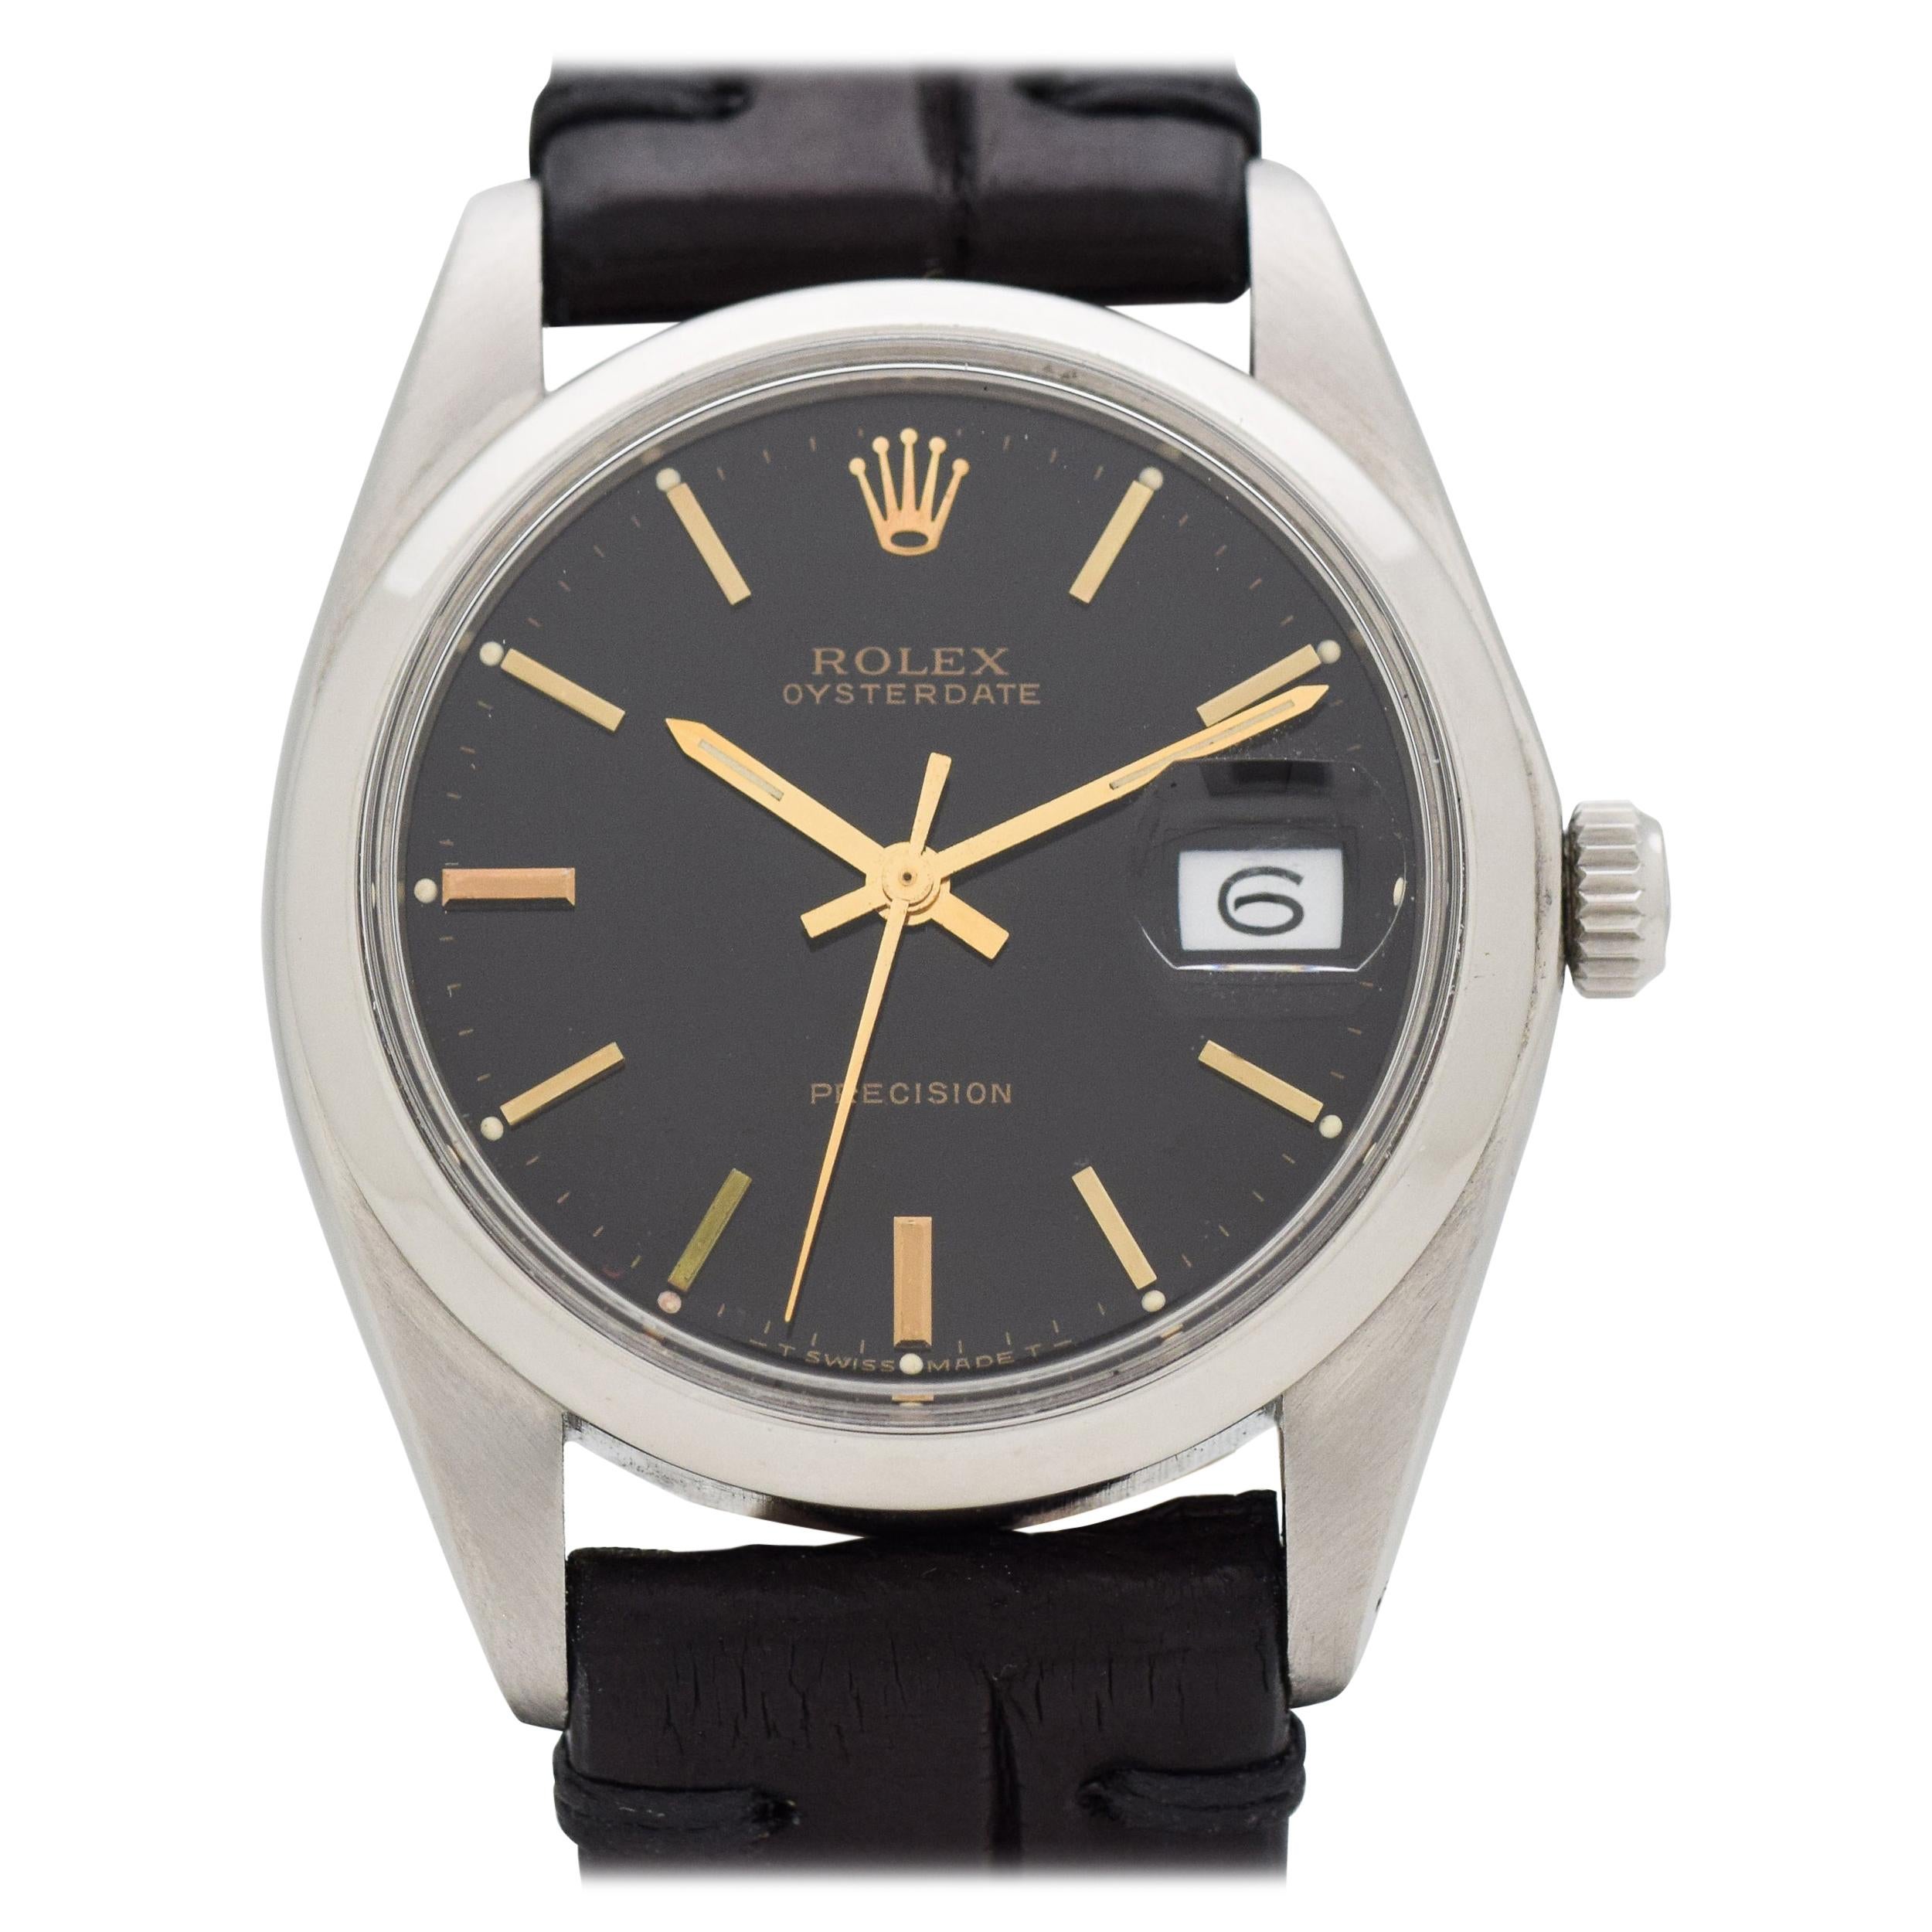 Vintage Rolex Oysterdate Stainless Steel Watch with Black Dial, 1972 For Sale